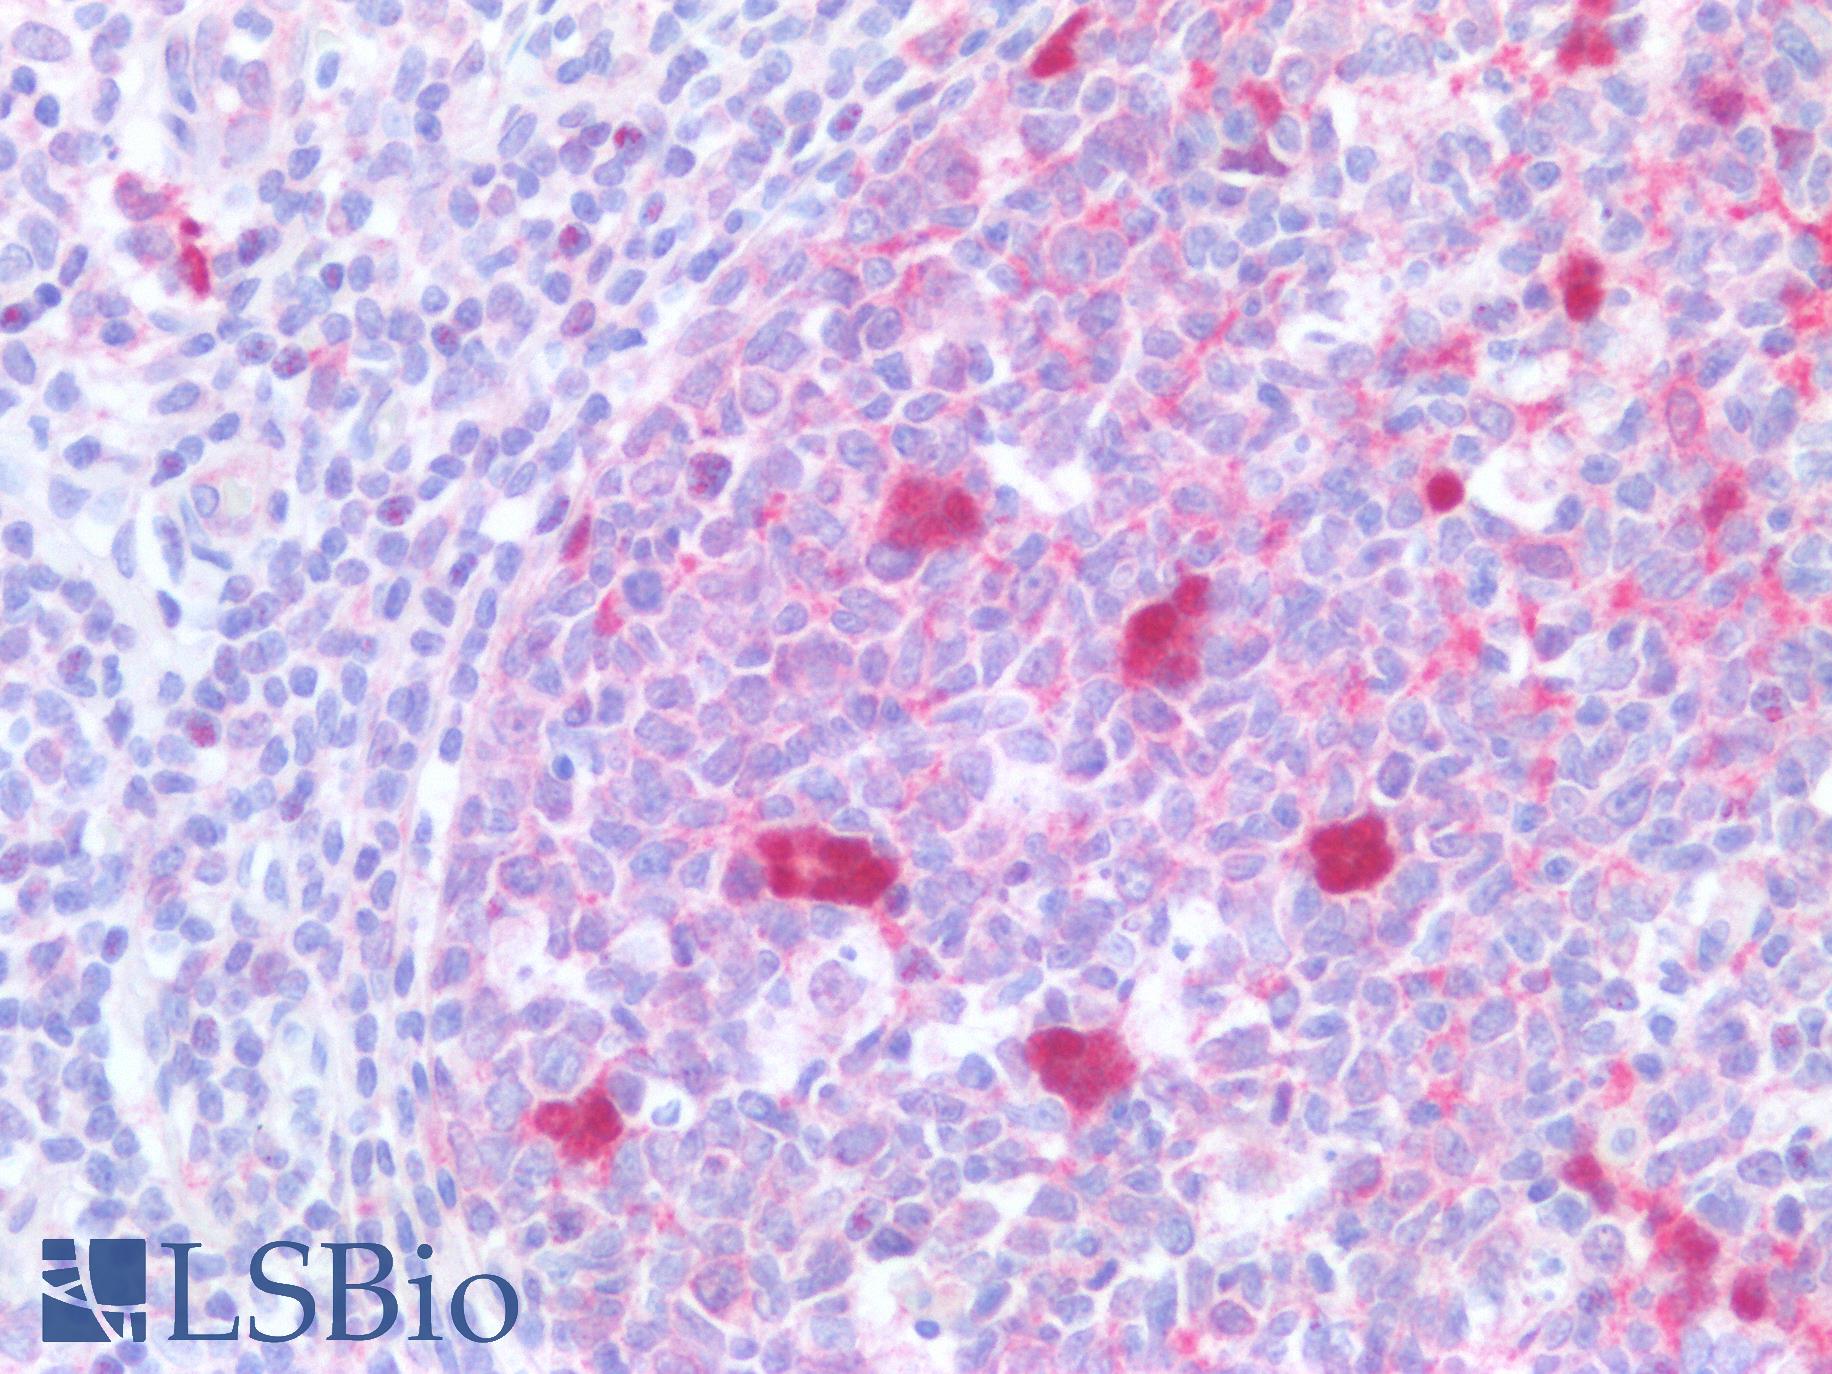 RELB Antibody - Human Tonsil: Formalin-Fixed, Paraffin-Embedded (FFPE)